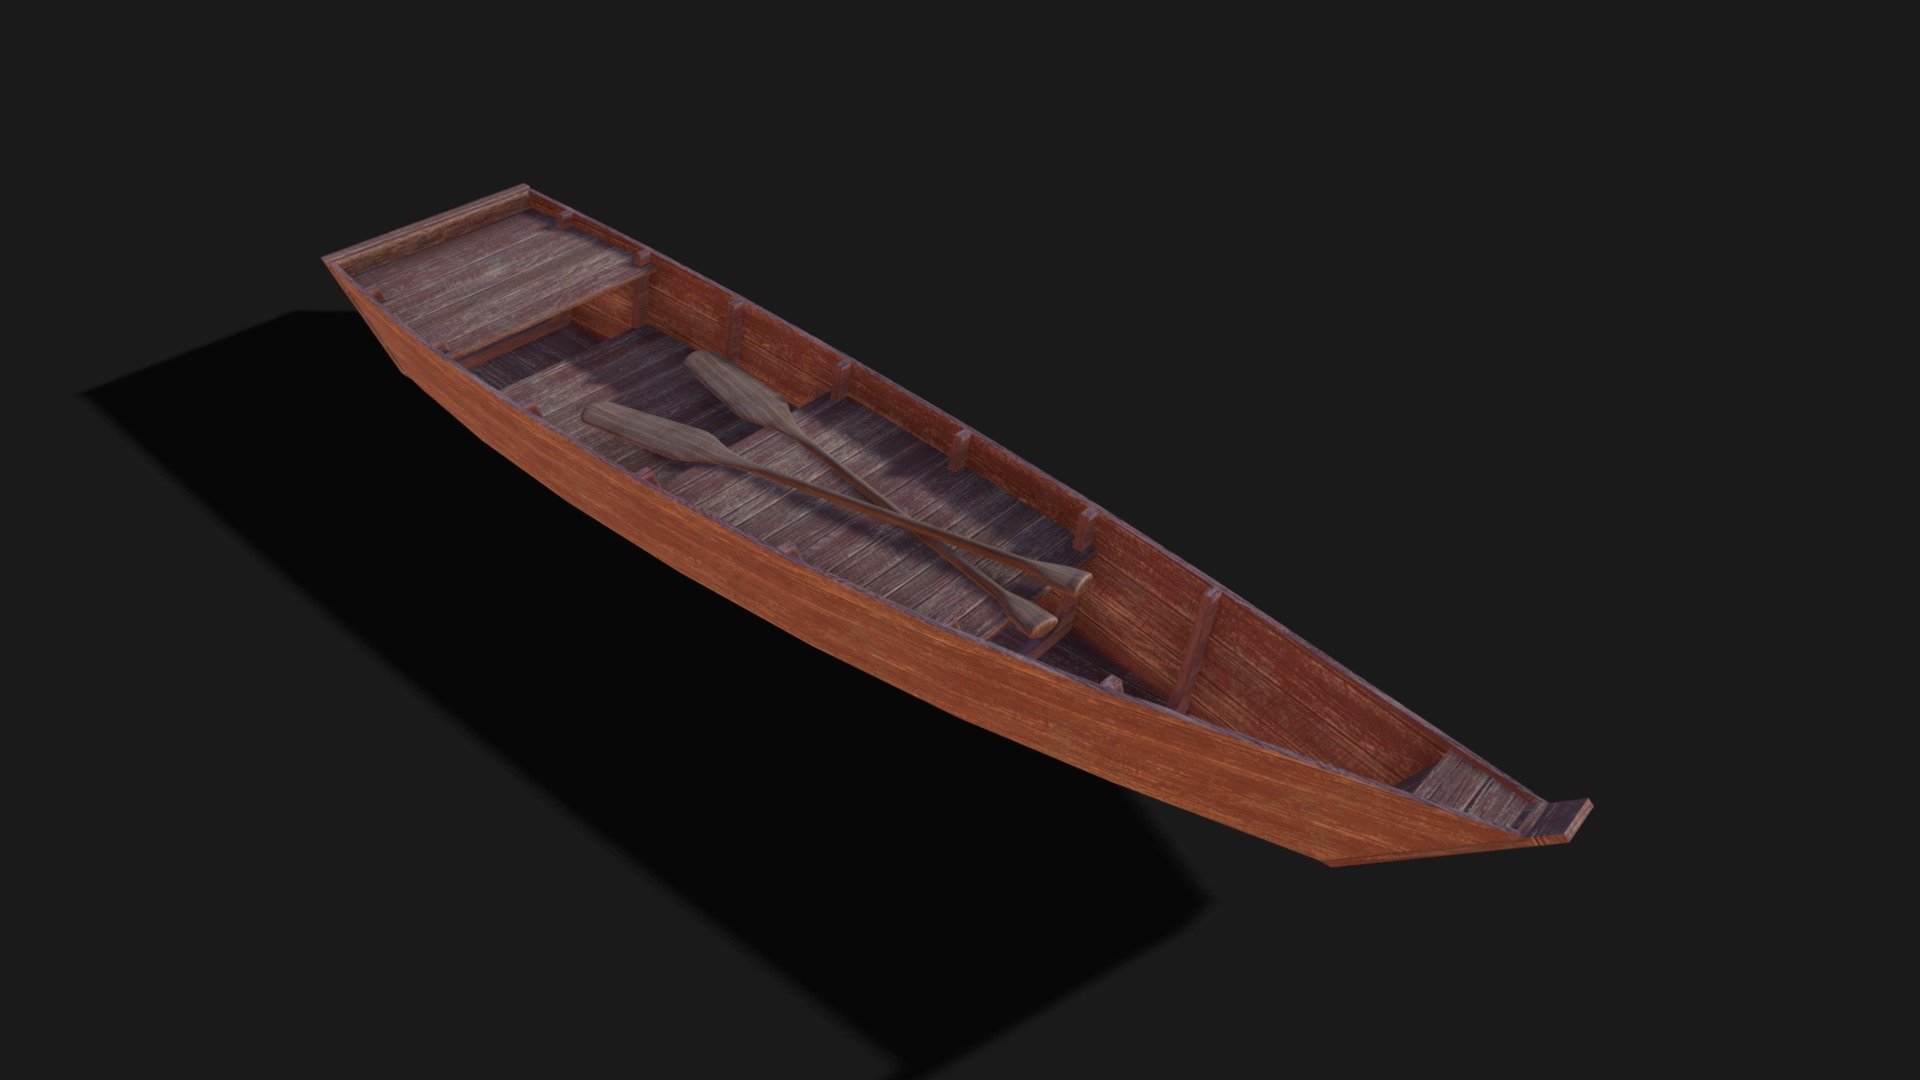 (Note : This model is just a preview, Good topology and lowpoly 3D model “PBR Lowpoly Wooden Boat V.1 Game Ready” are packed in Additional File Below)

PBR Lowpoly Wooden Boat V.1 ArchiViz and Game Ready 3D model for your 3d asset or 3d project it also suitable for any visual production, game assets, VR, AR, exterior rendering, advertising, and illustration. made in blender 3.5 and rendered with Cycles render engine. With 5 different color maps, you can get creative and easly change the model color .

3D File Formats:

NOTE : All the texture (Texture Maps) are packed into a one Zip file called &ldquo;Textures